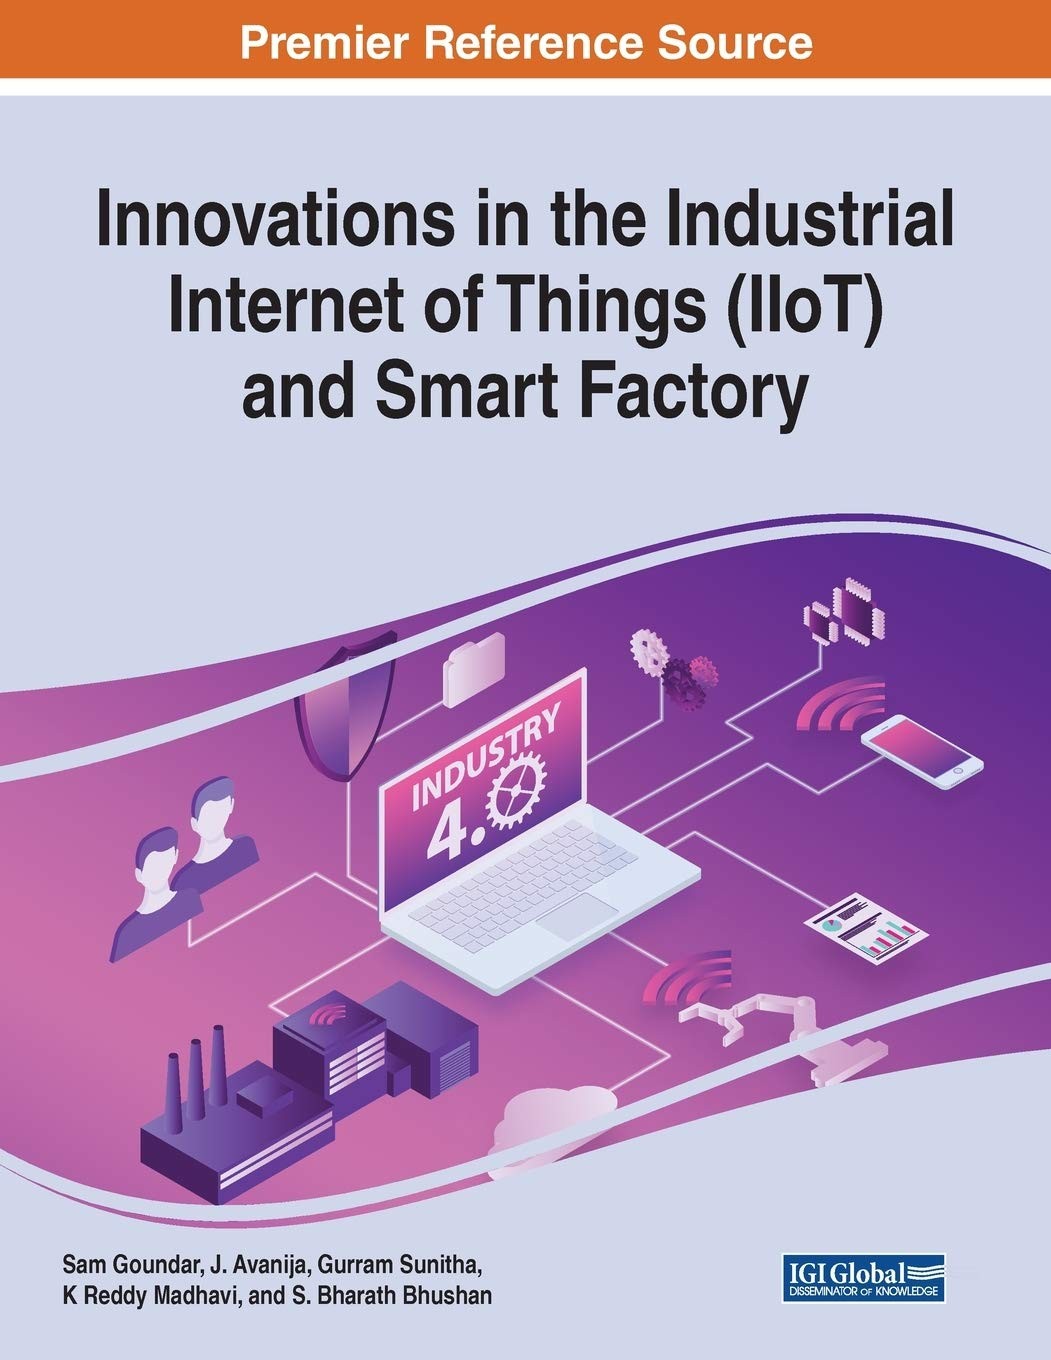 Innovations in the Industrial Internet of Things and Smart Factory